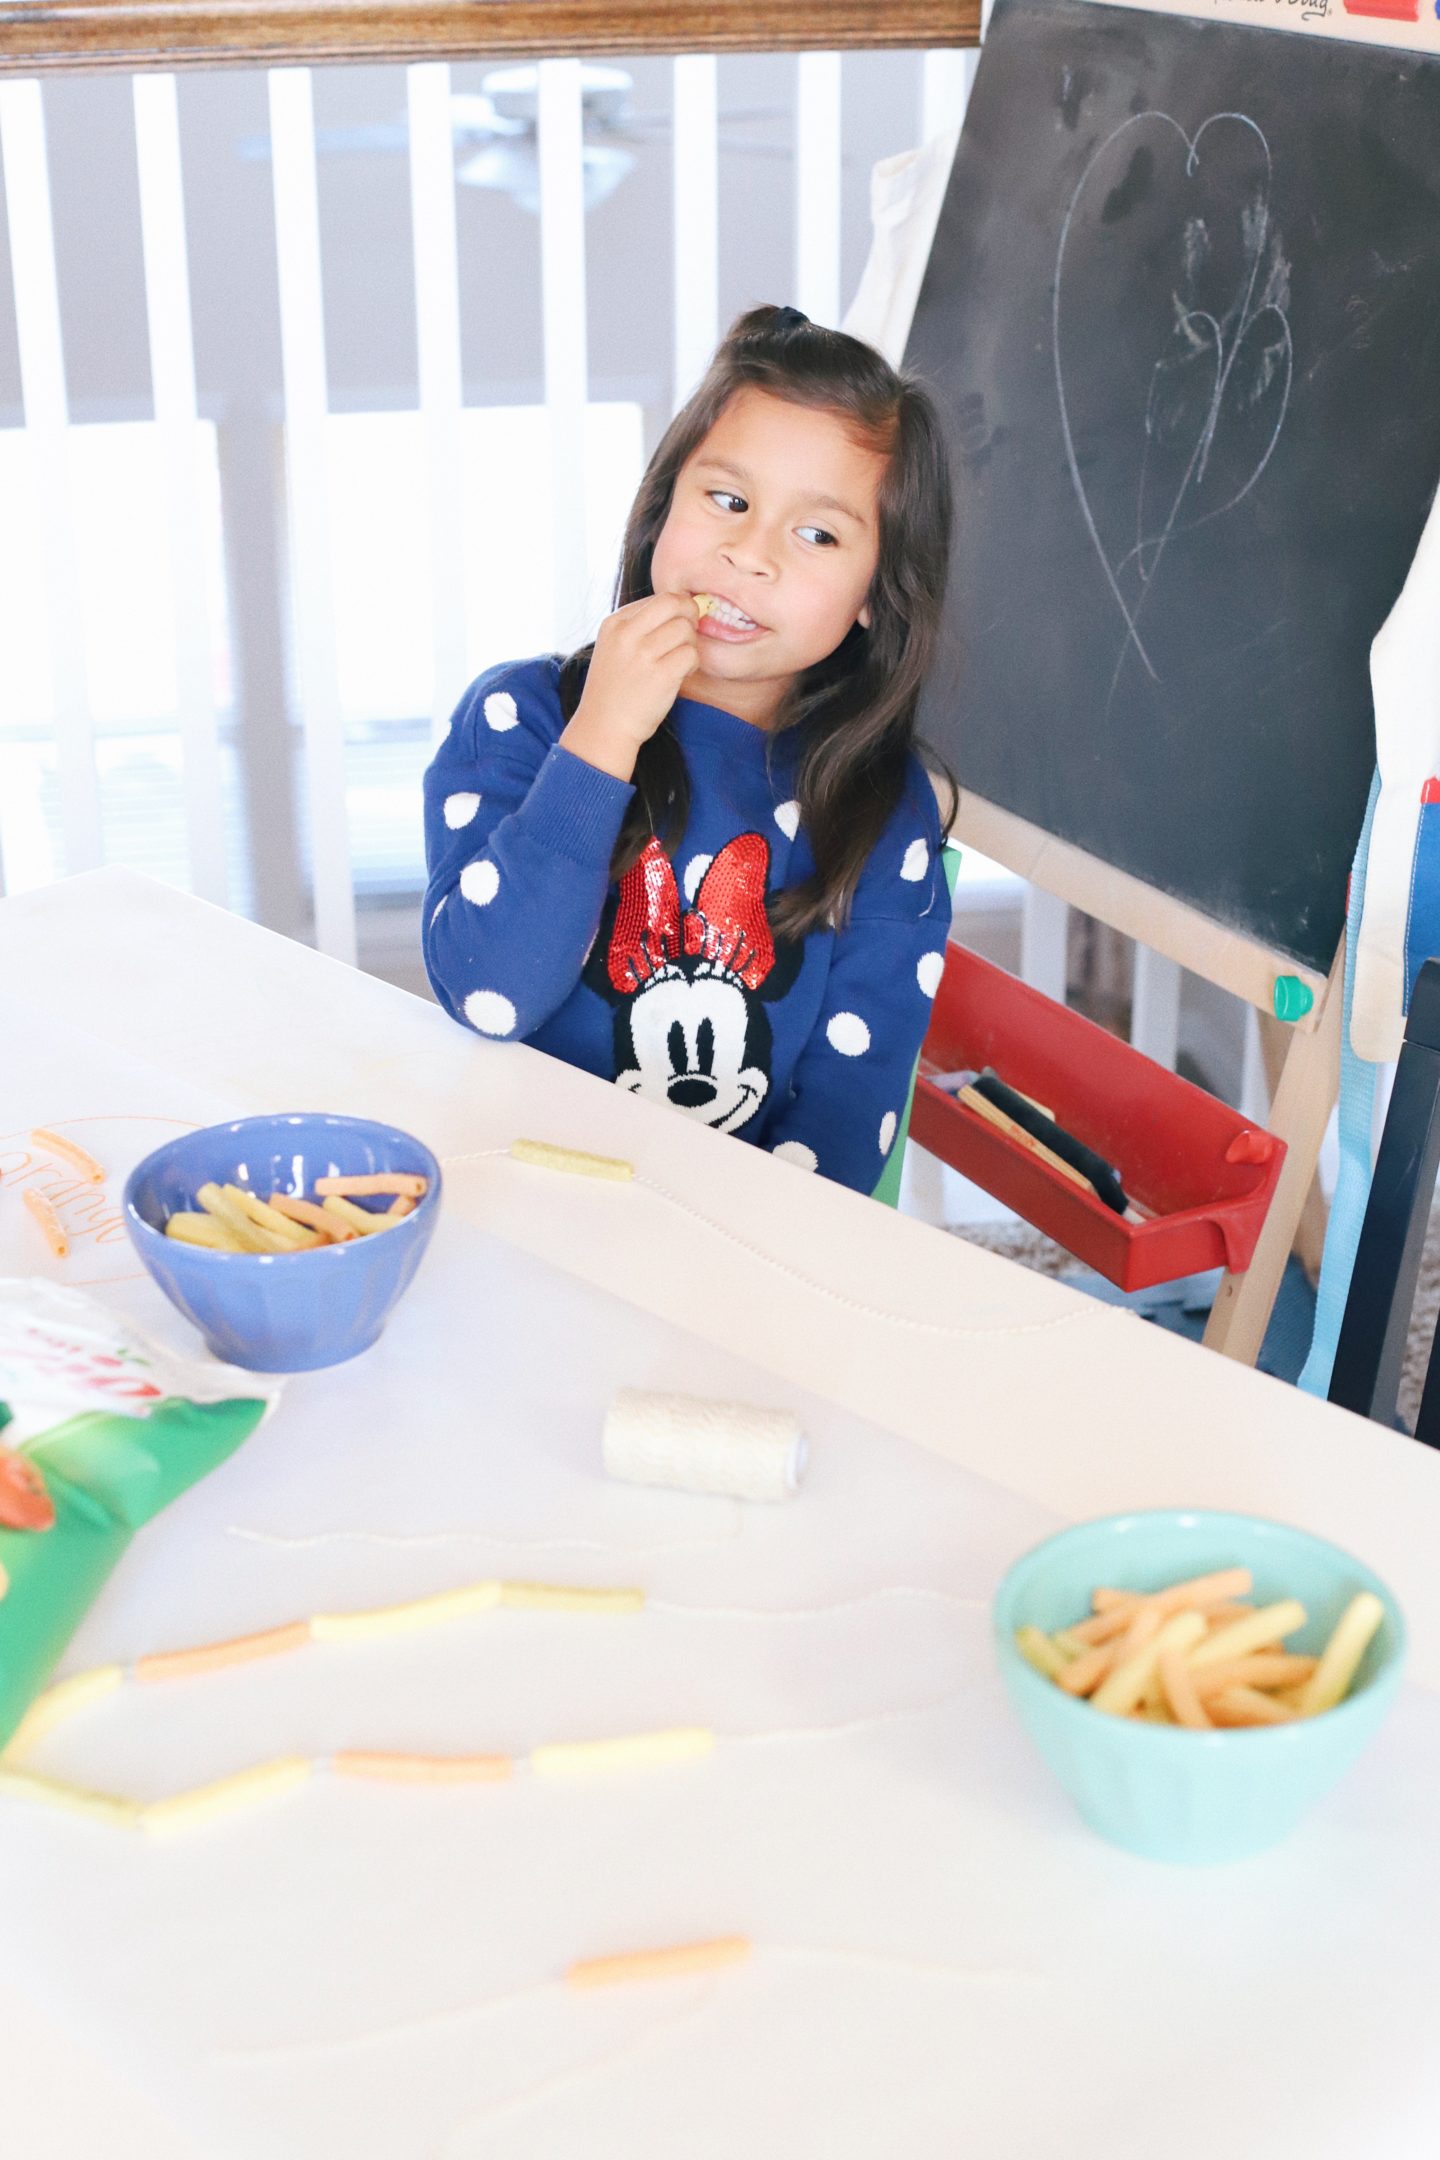 The perfect indoor winter activity to solve the problem of your kids' two most dreaded complaints: "I'm bored" and "I'm hungry." #toddleractivity #winteractivity #kidsactivity #preschool #sensory #motorskills